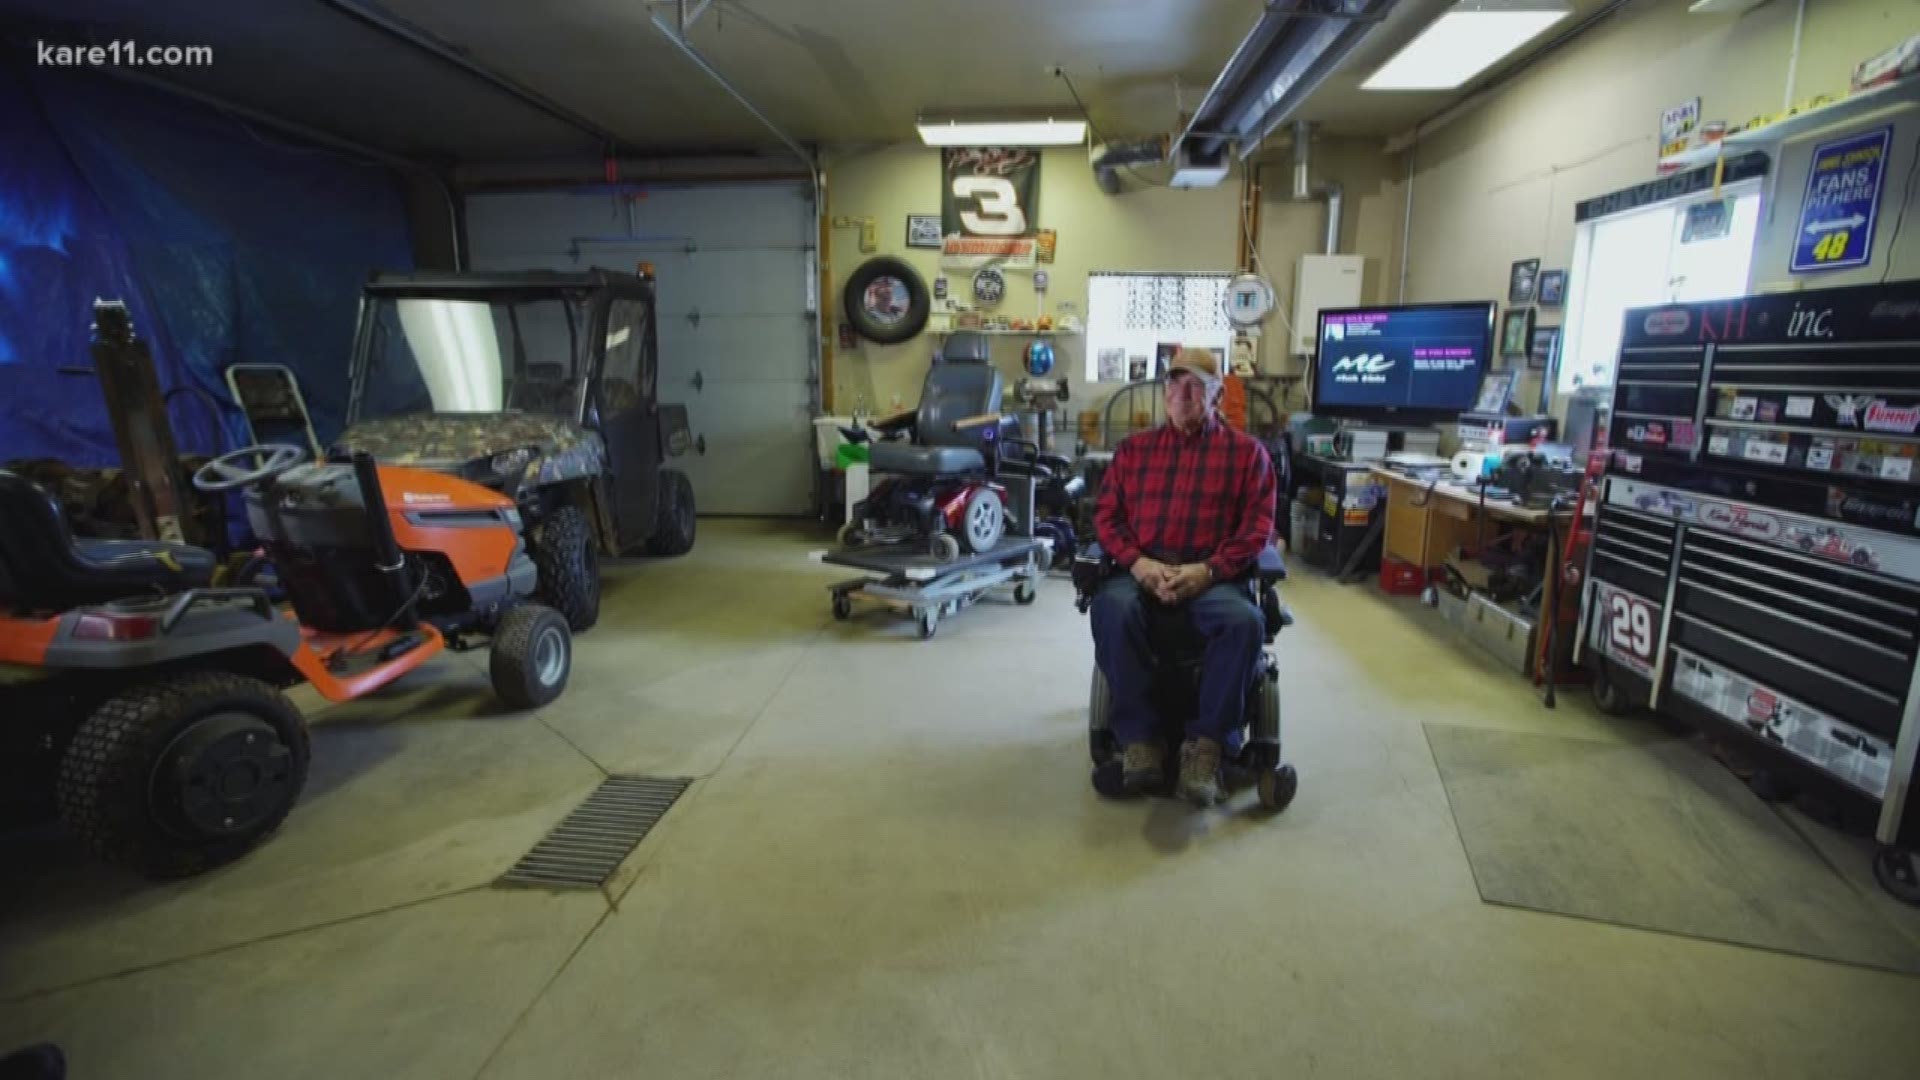 When the last of the classic cars rolled out of Bill’s shop, different wheels moved in. These days, he toils for hours restoring power wheelchairs.